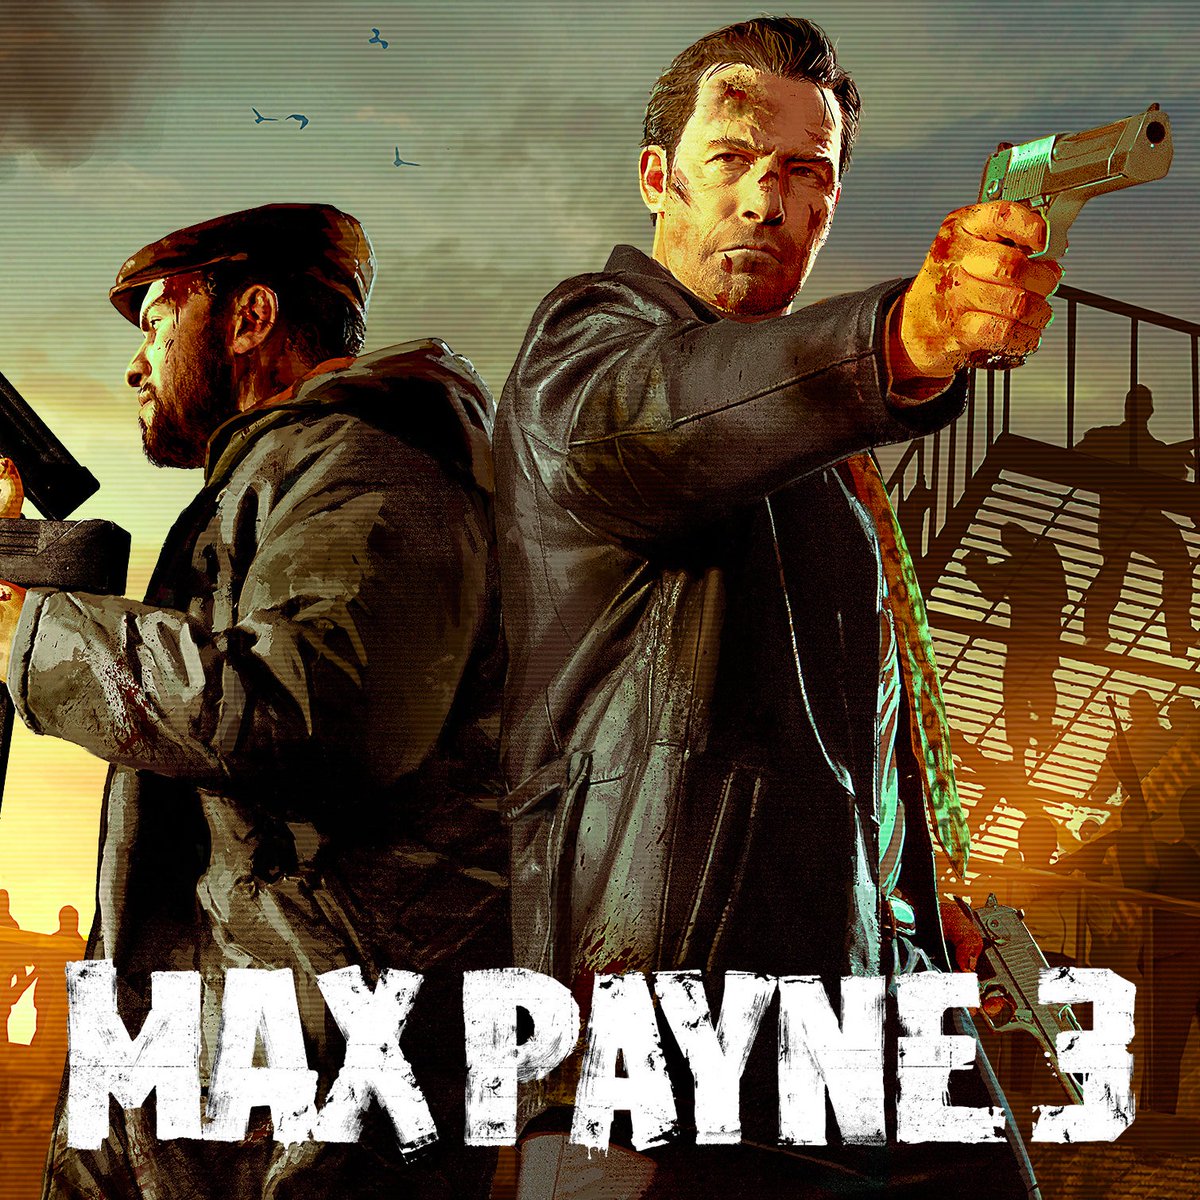 On this day 12 years ago, 'MAX PAYNE 3' released 

The final game in the Max Payne story